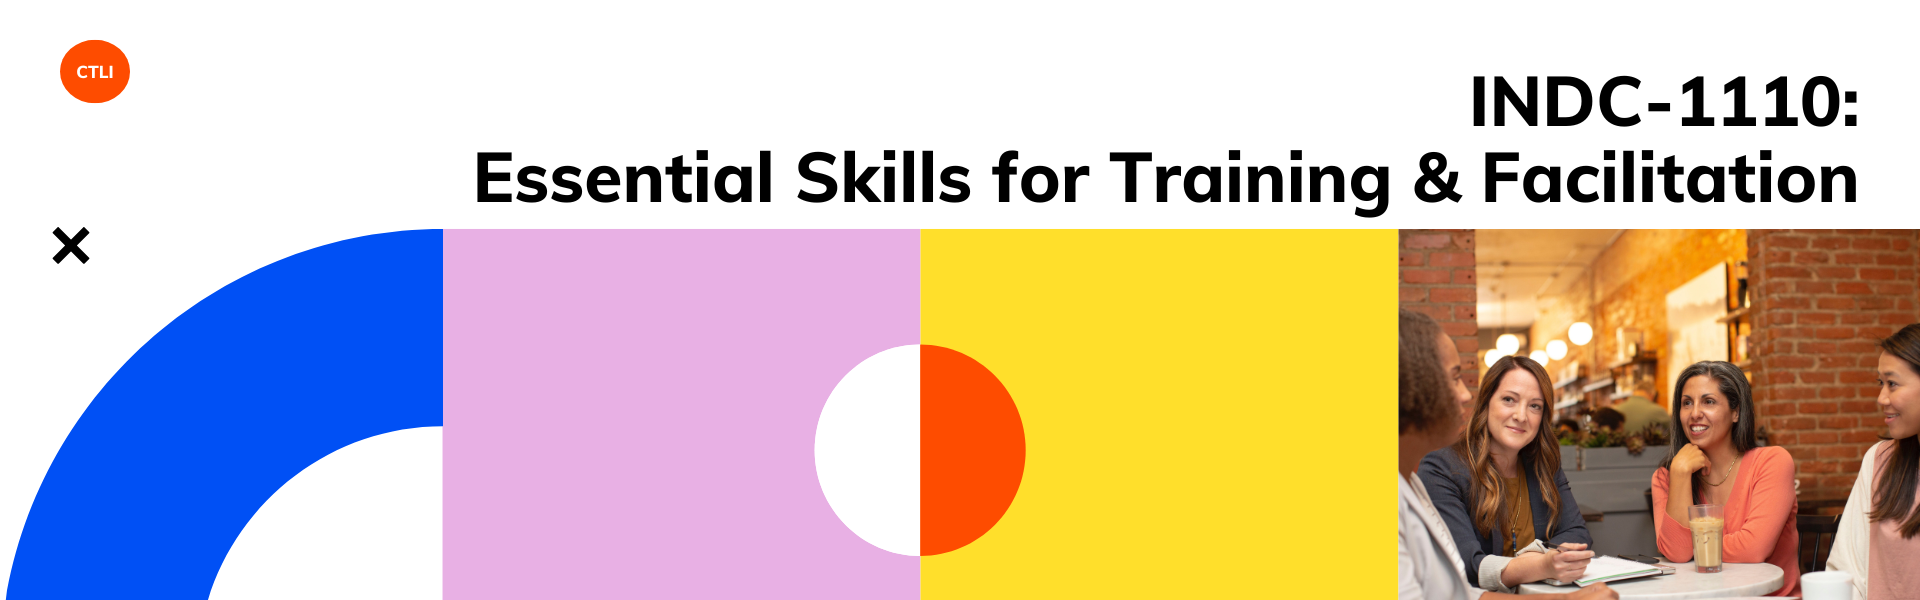 Graphic header promoting the INDC-1110: Essential Skills for Training & Facilitation course.